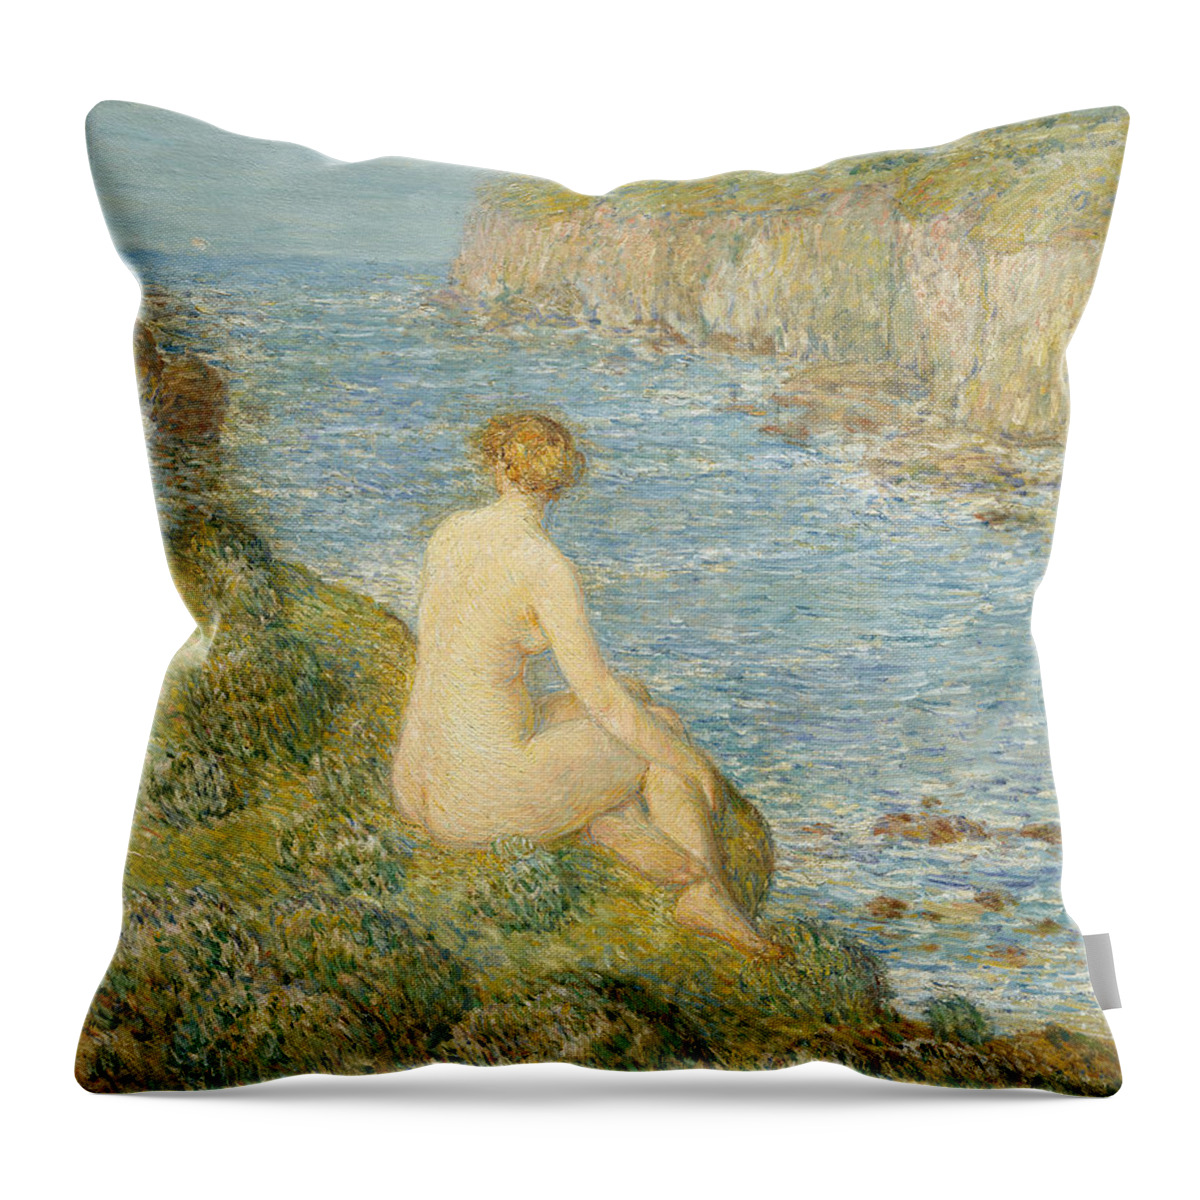  Throw Pillow featuring the painting Nymph And Sea by Childe Hassam